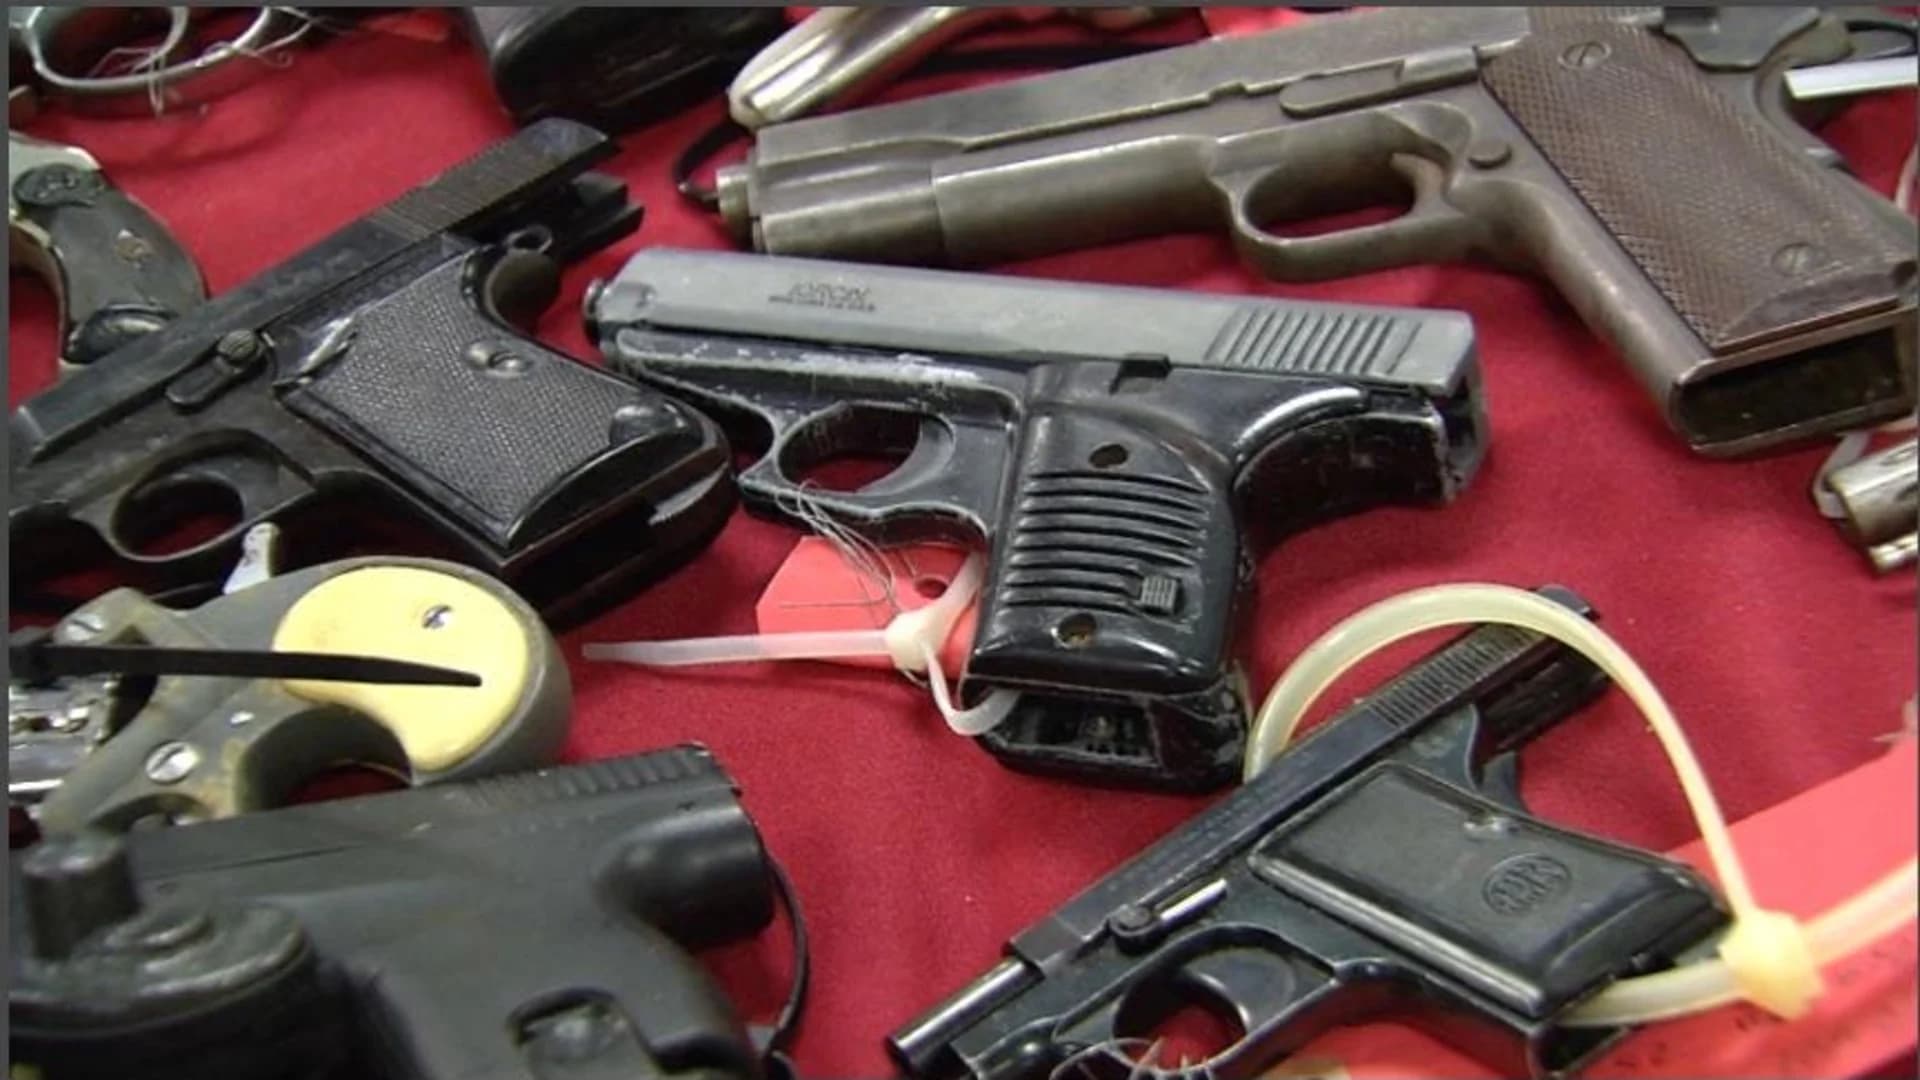 NJ leads charge in effort to ban carrying guns in public